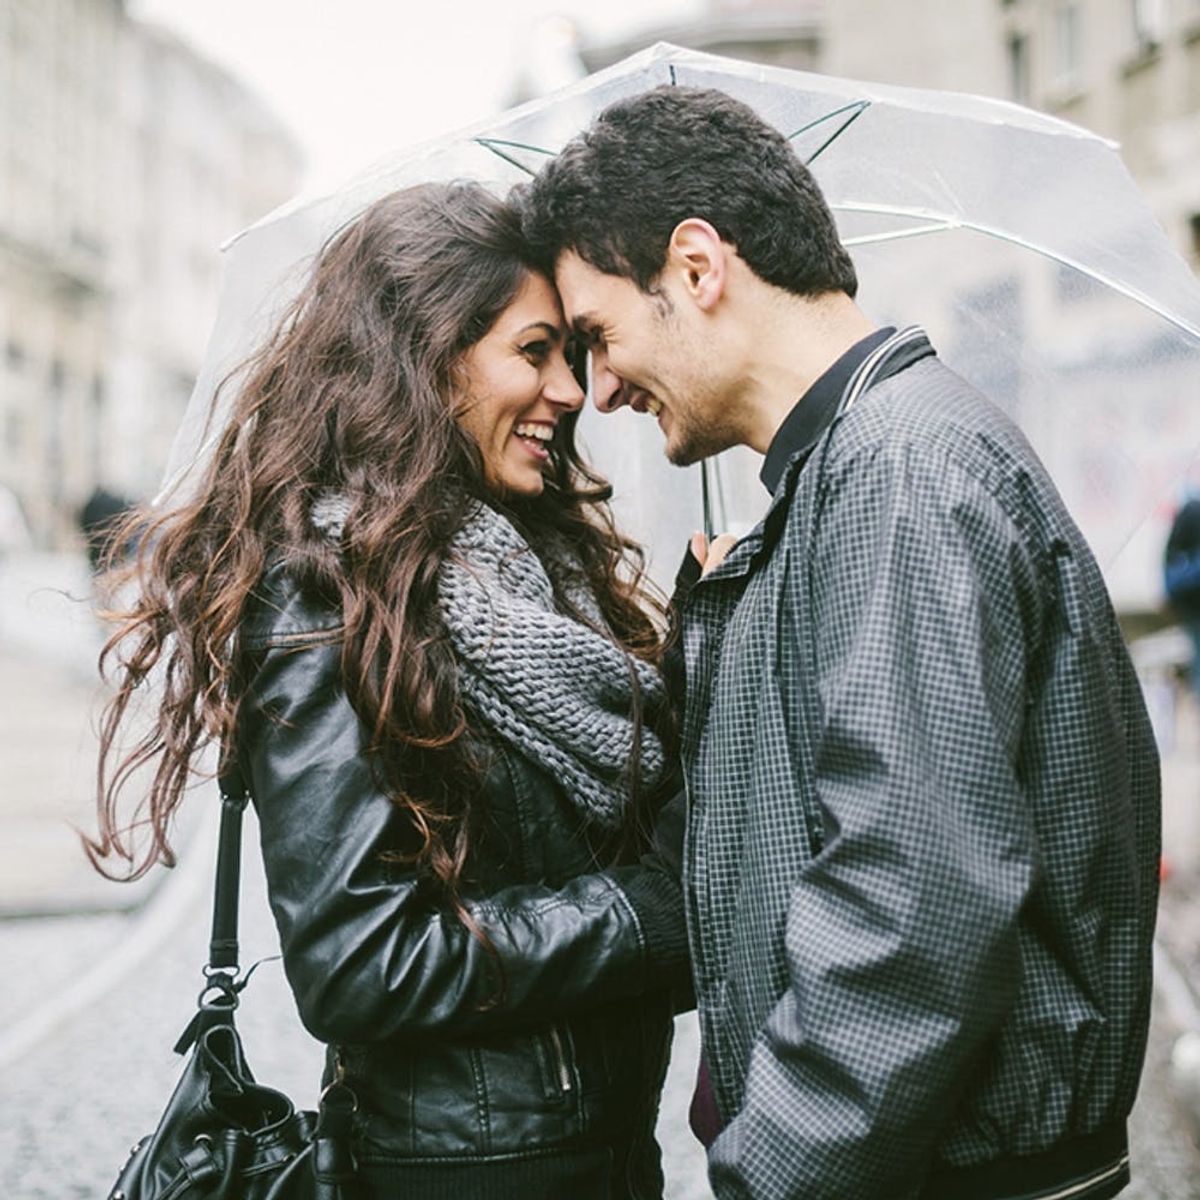 This One Weird Thing Instantly Makes Men More Attractive to Women